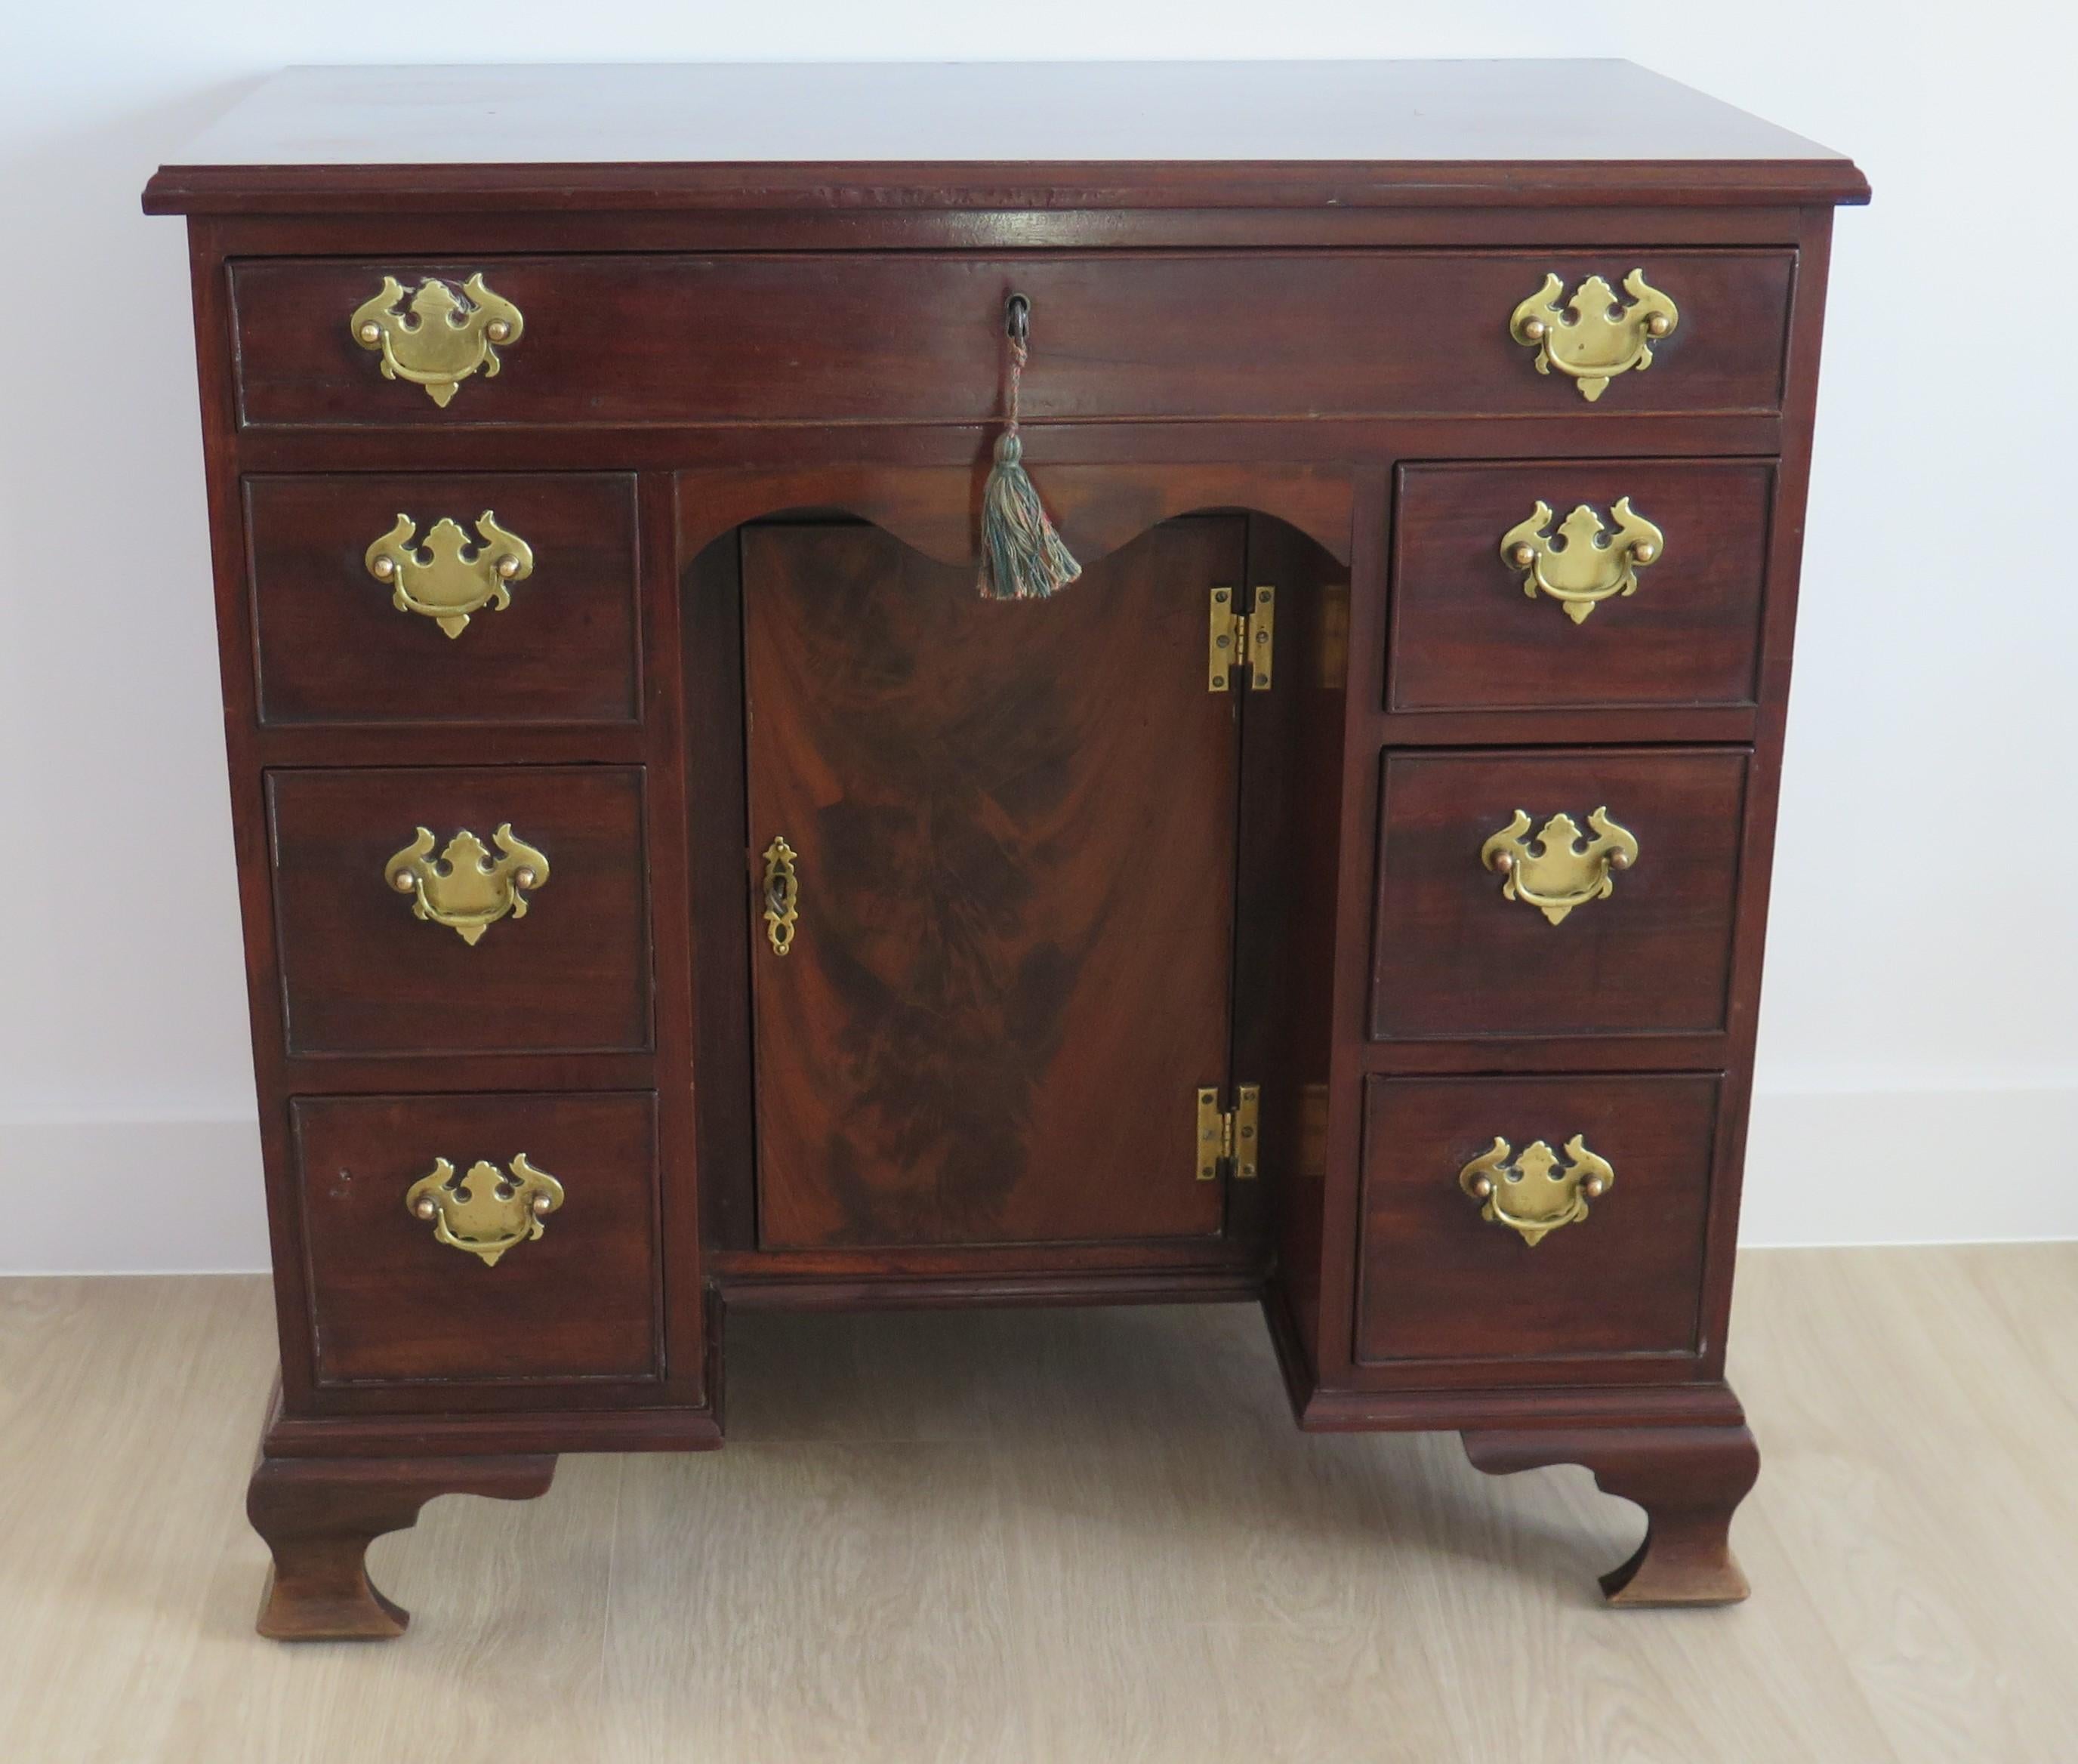 George 11nd small Kneehole Desk in Mahogany, English Circa 1745 In Good Condition For Sale In Lincoln, Lincolnshire